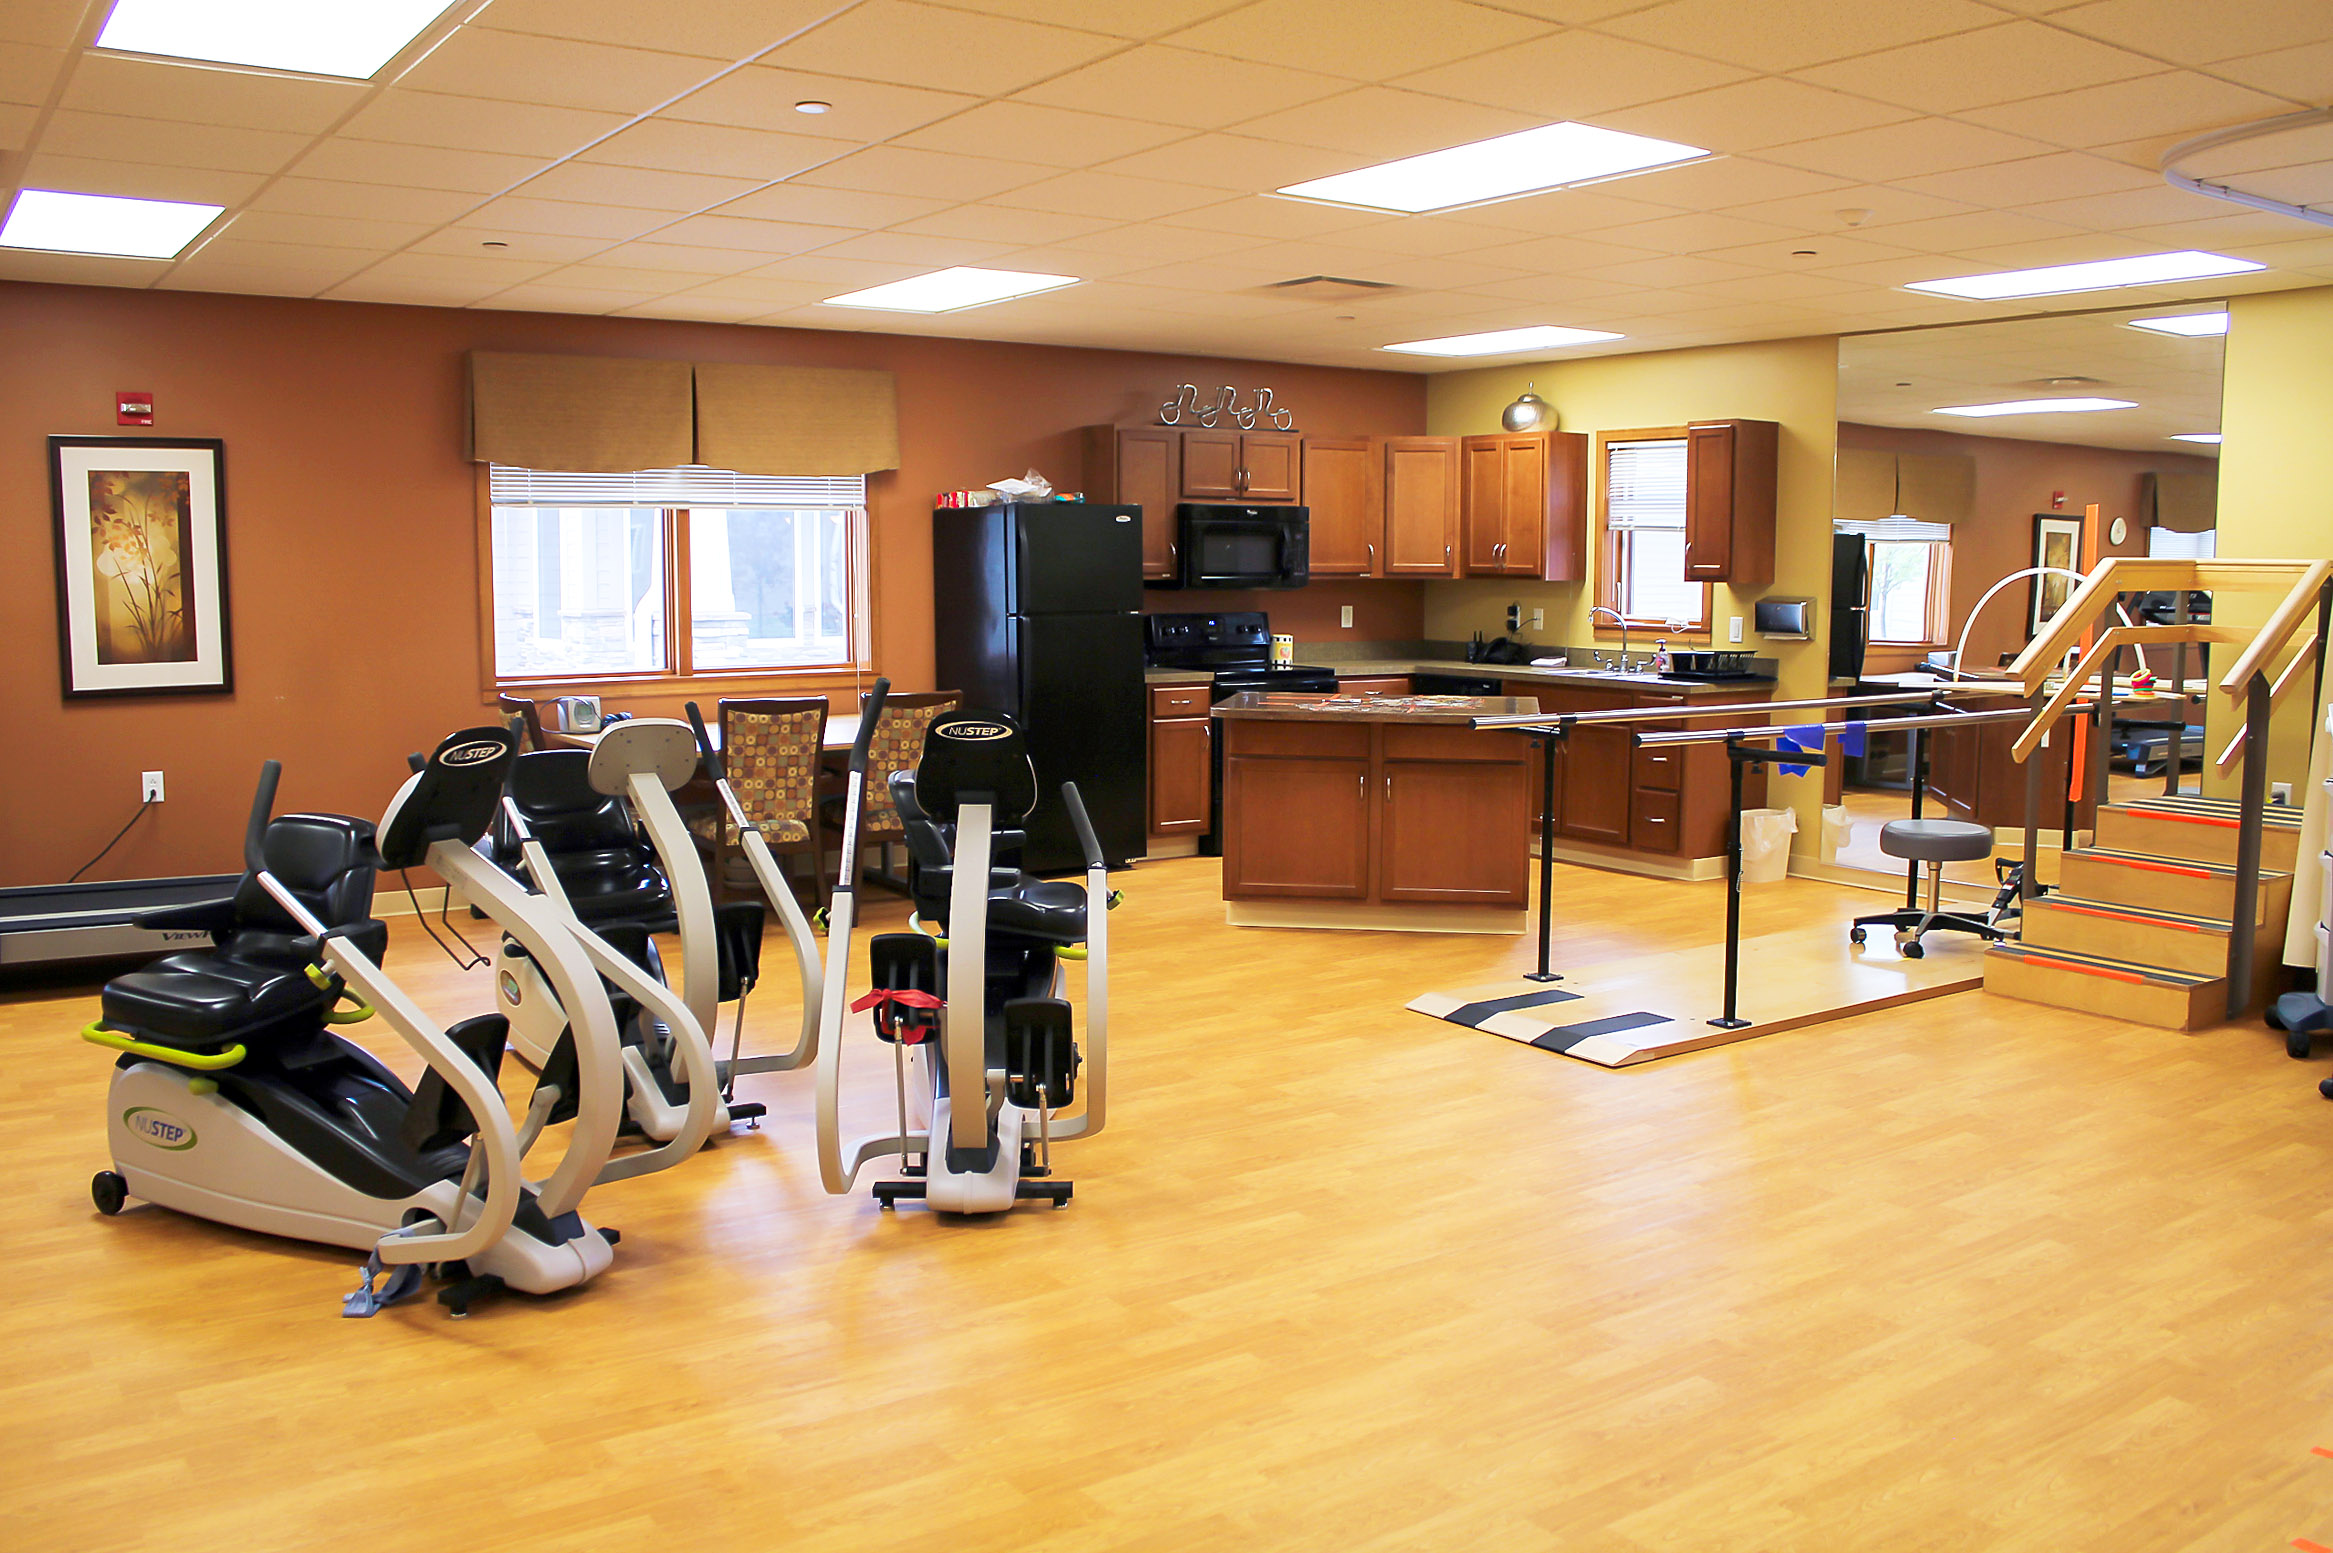 The therapy gym is ready to help you get back to your life at Good Samaritan Society - Beatrice in Beatrice, Nebraska.